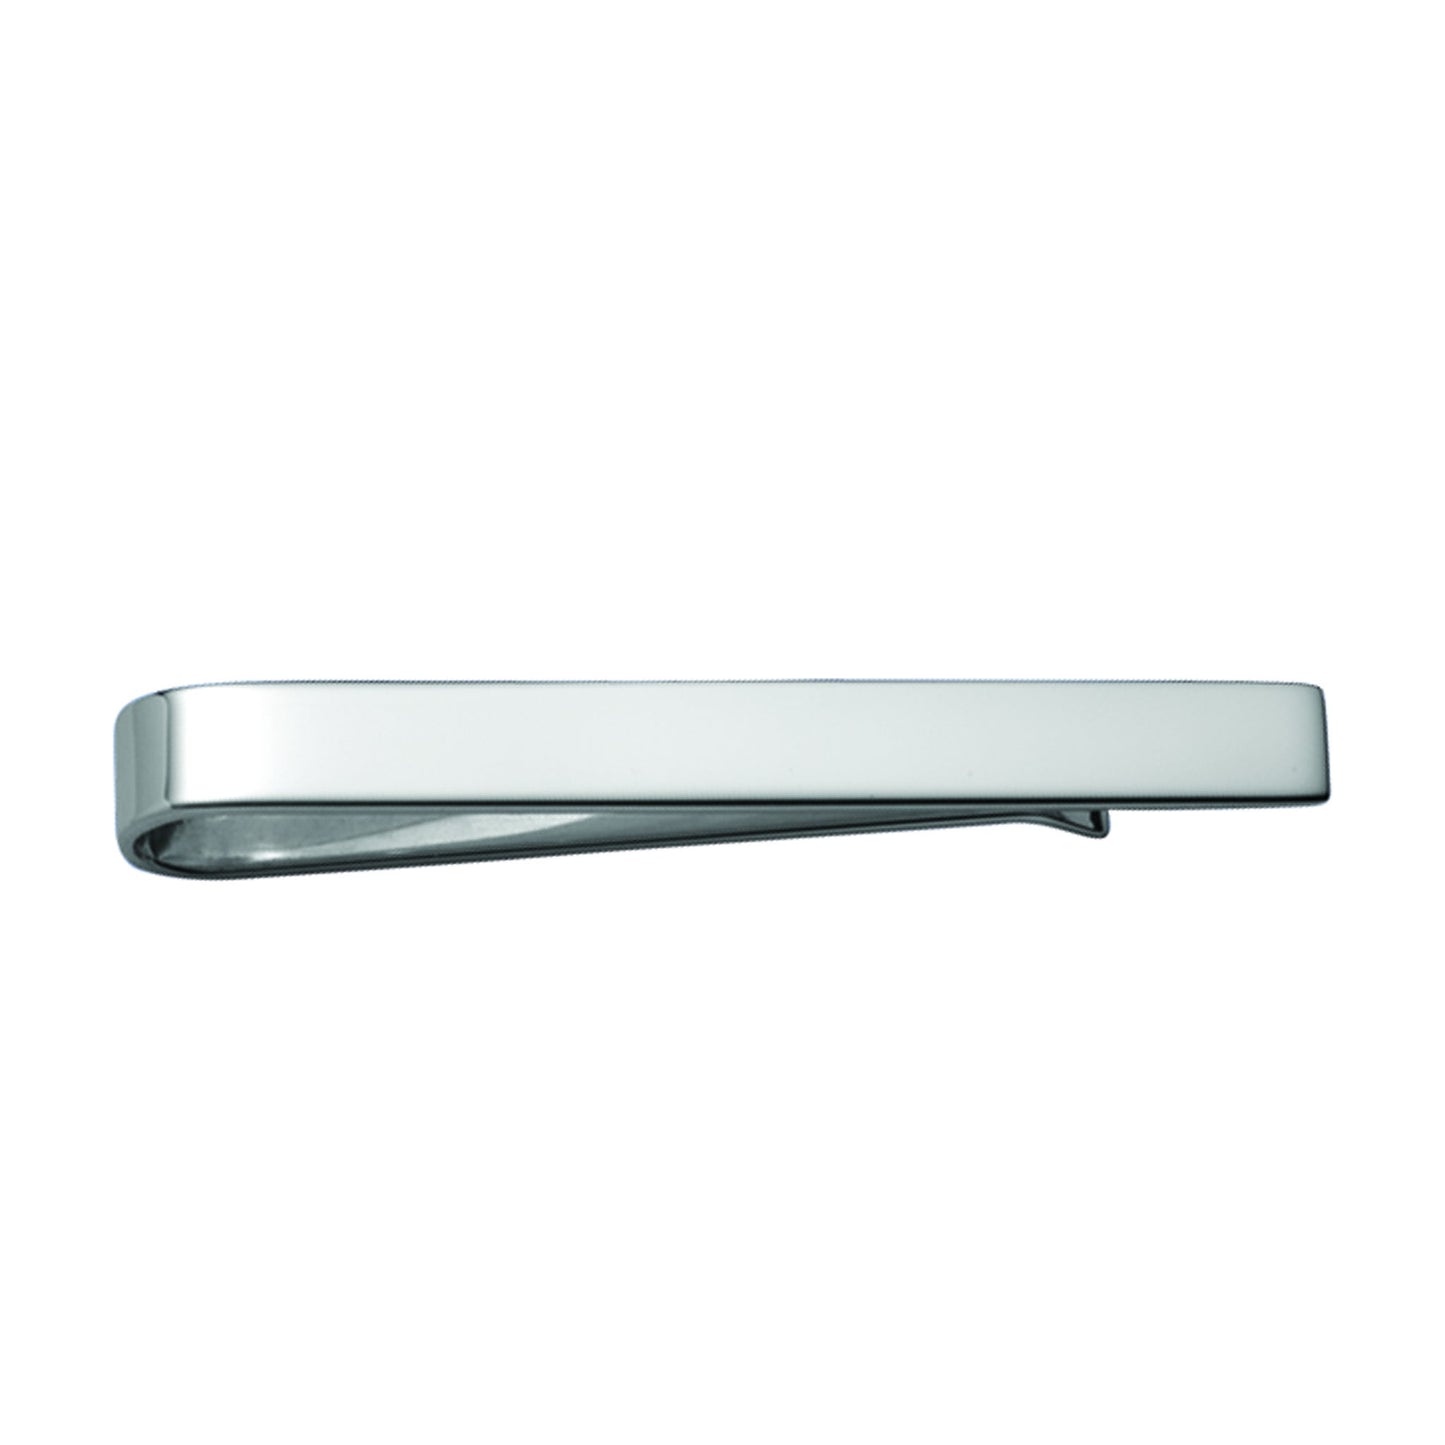 A sterling silver polished tie slide displayed on a neutral white background.